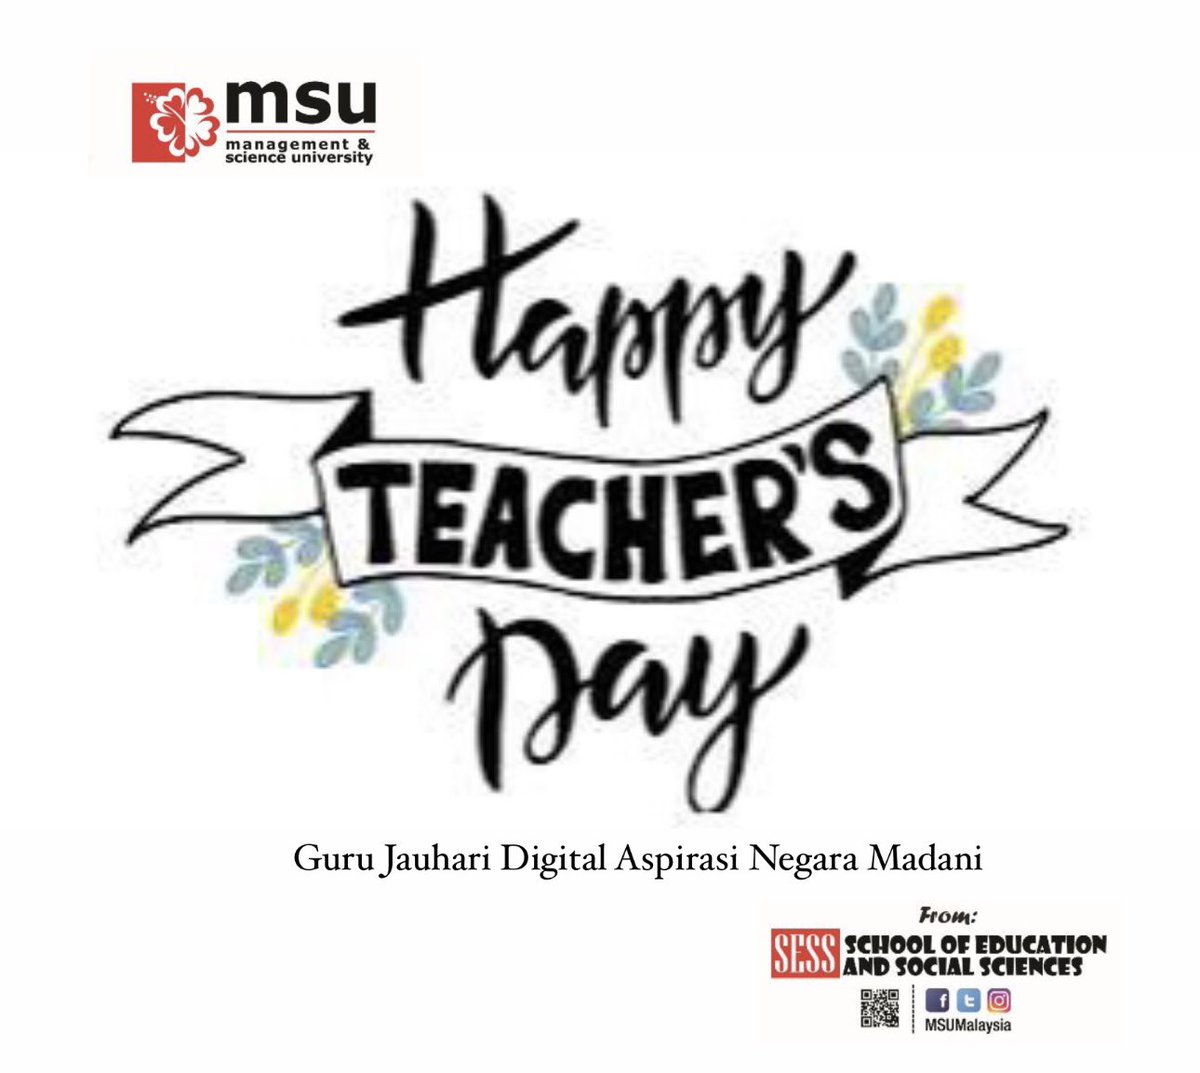 School of Education and Social Sciences wishes all educators a very Happy Teacher’s Day. 

Watch this space for exciting upcoming events in conjunction with Teacher’s Day 2024.

#SESS #BTESL #BECE #BEPE 
#BES #BEVA